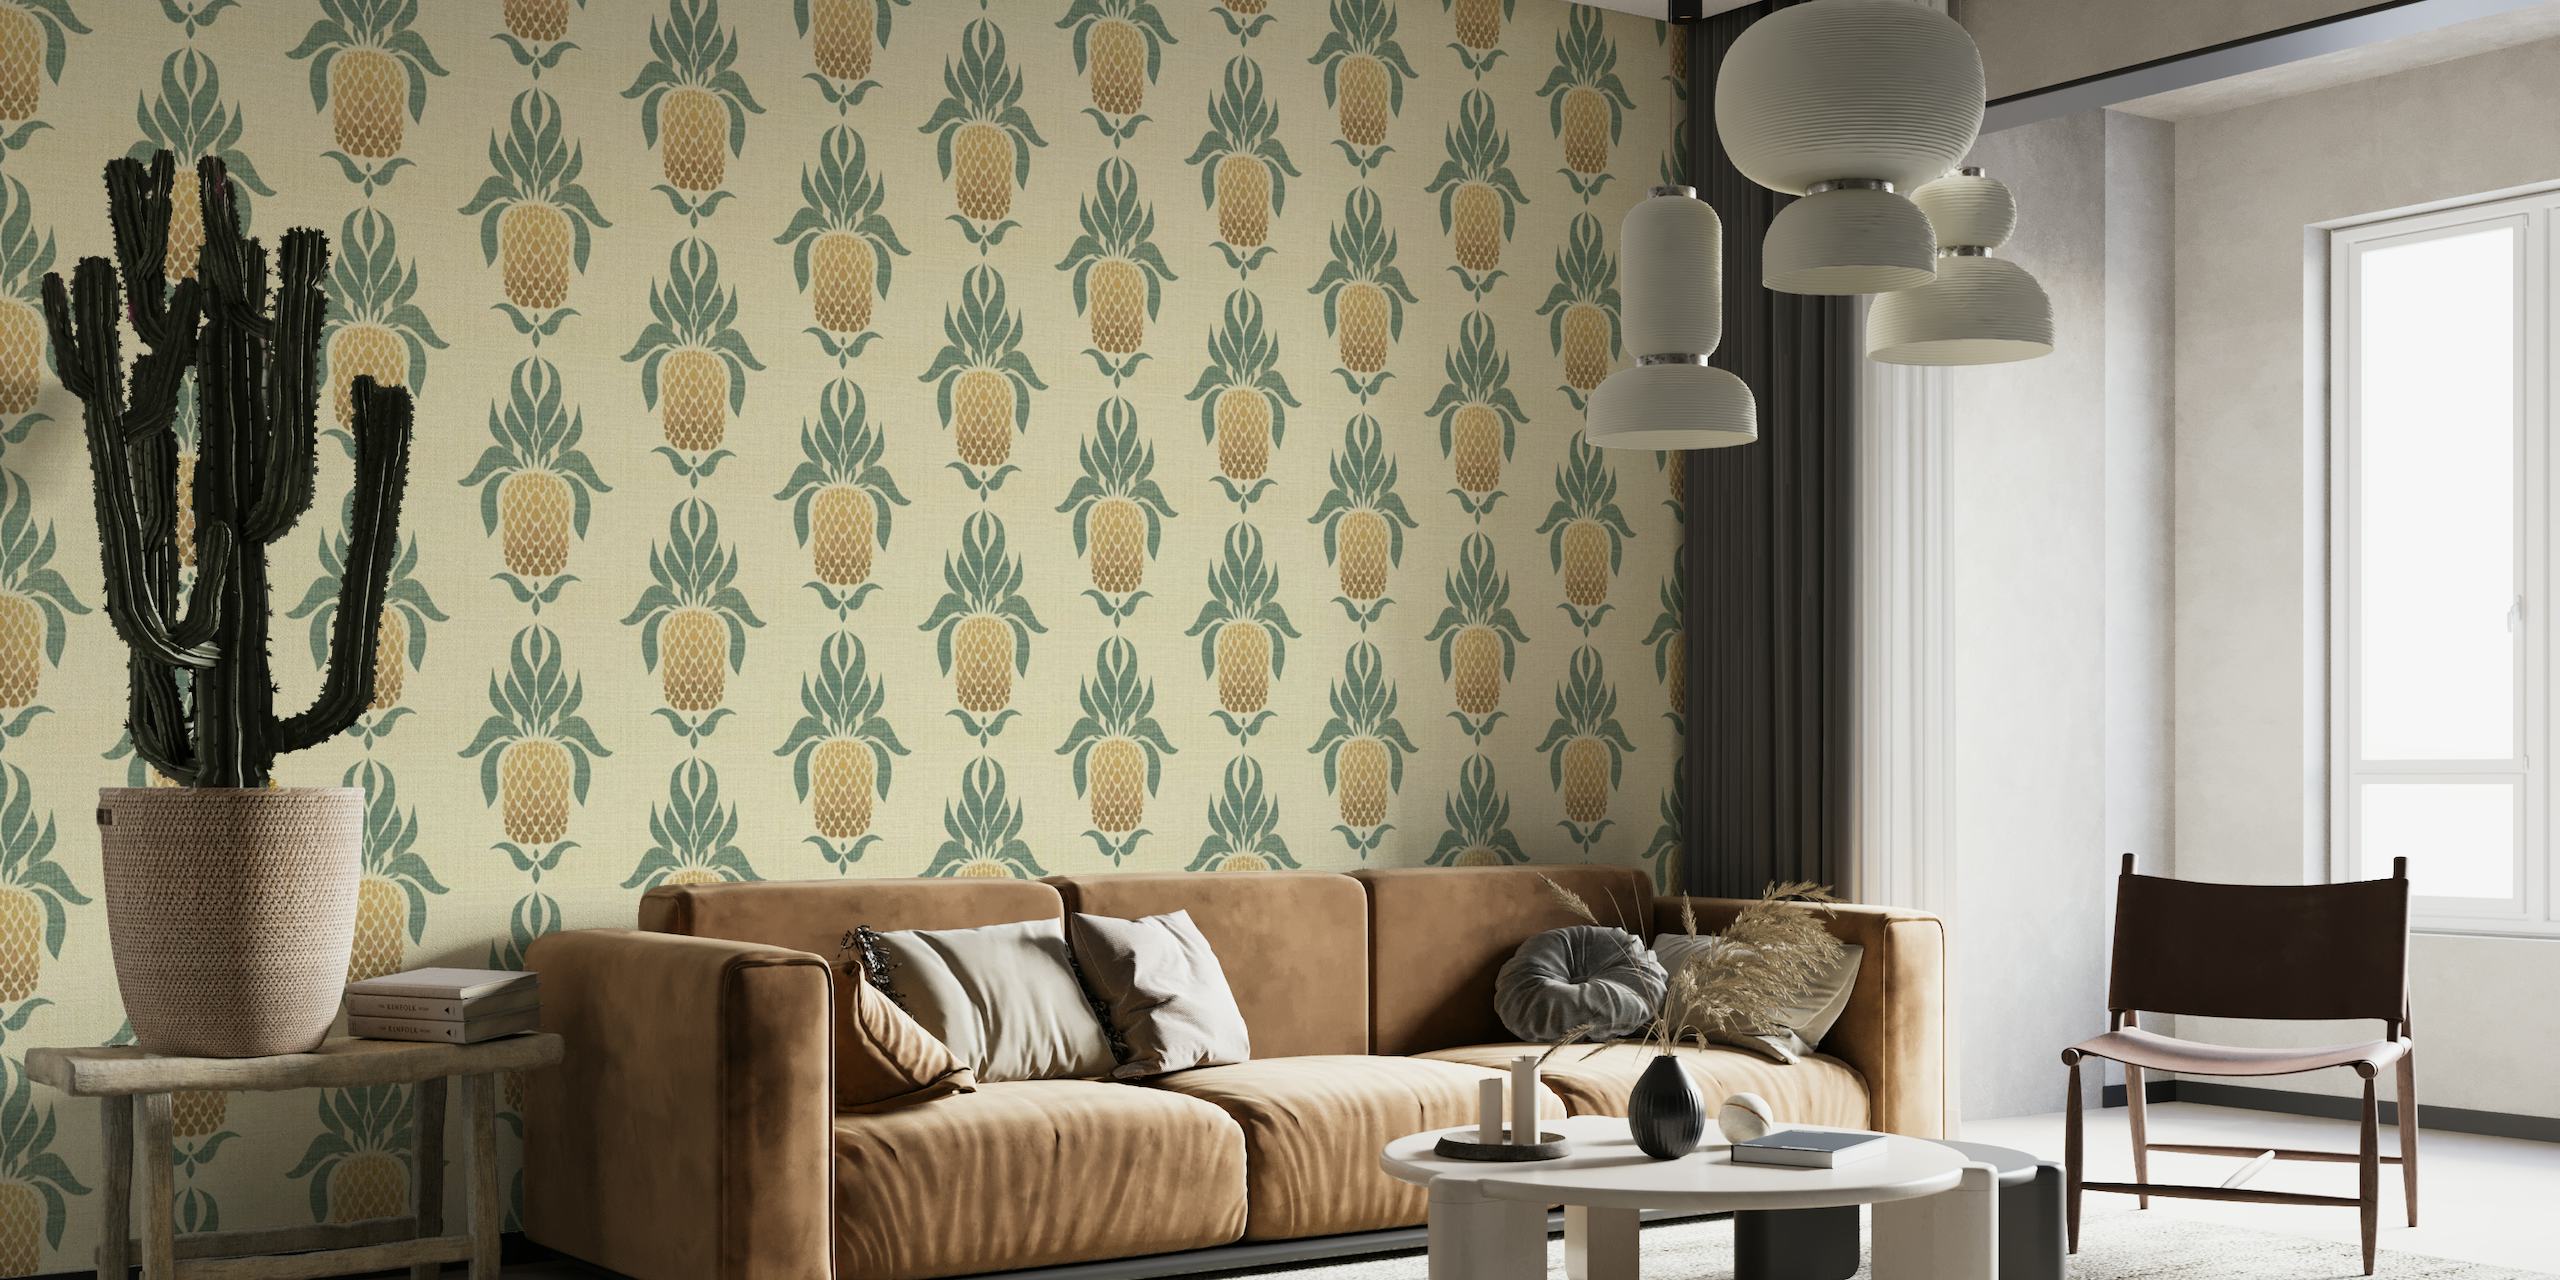 Tropical ombre pineapple pattern on a natural backdrop for wall murals